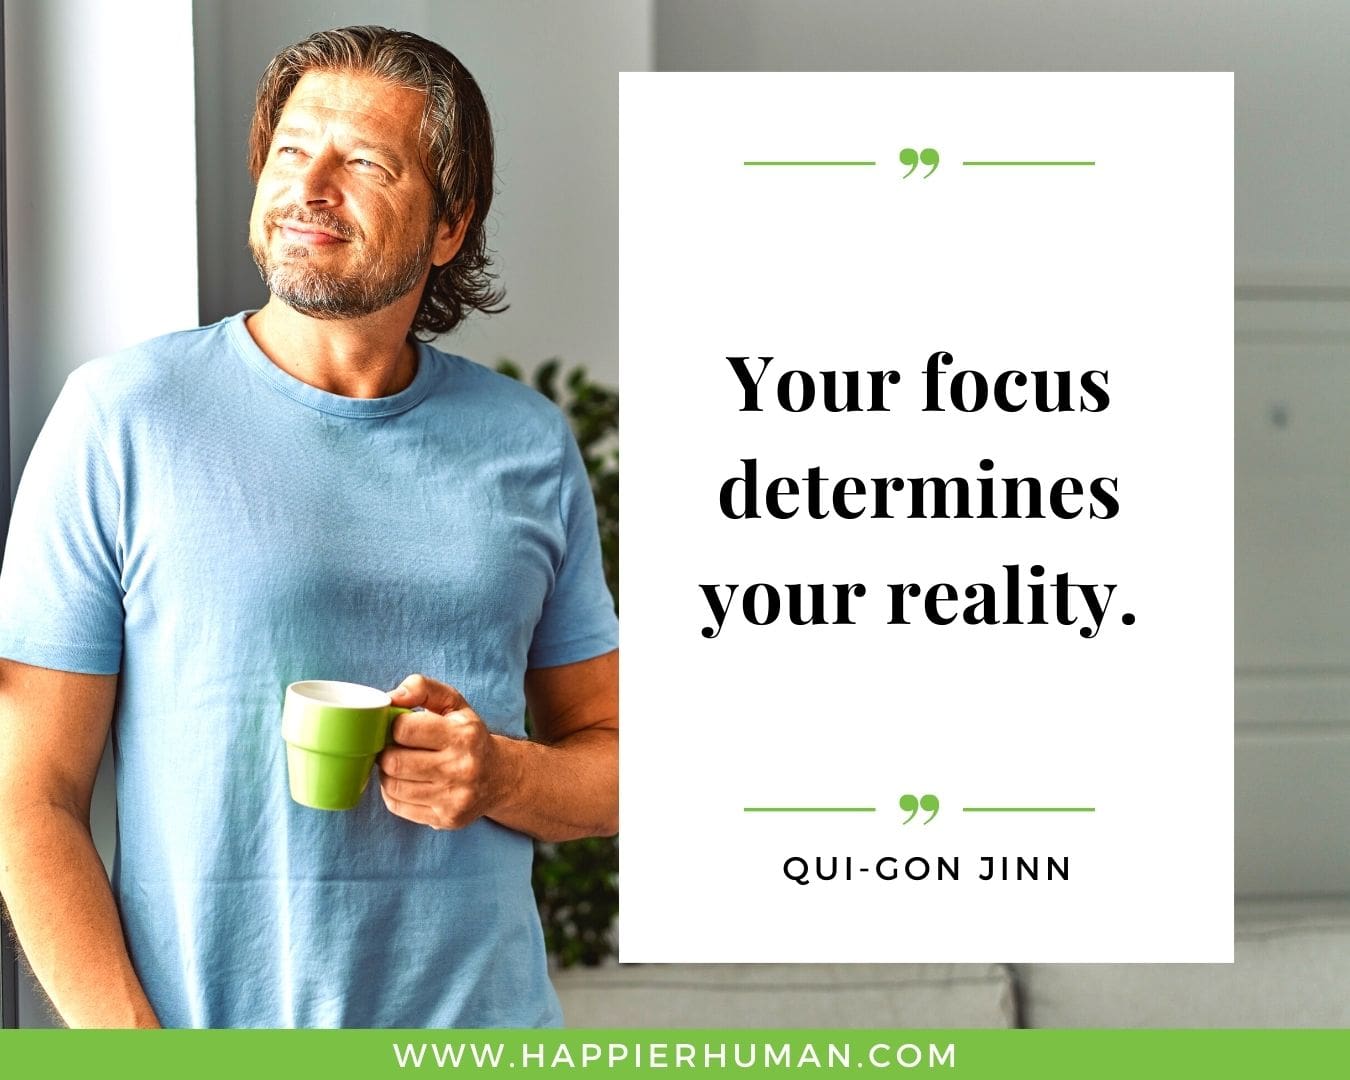 Overthinking Quotes - “Your focus determines your reality.” - Qui-Gon Jinn